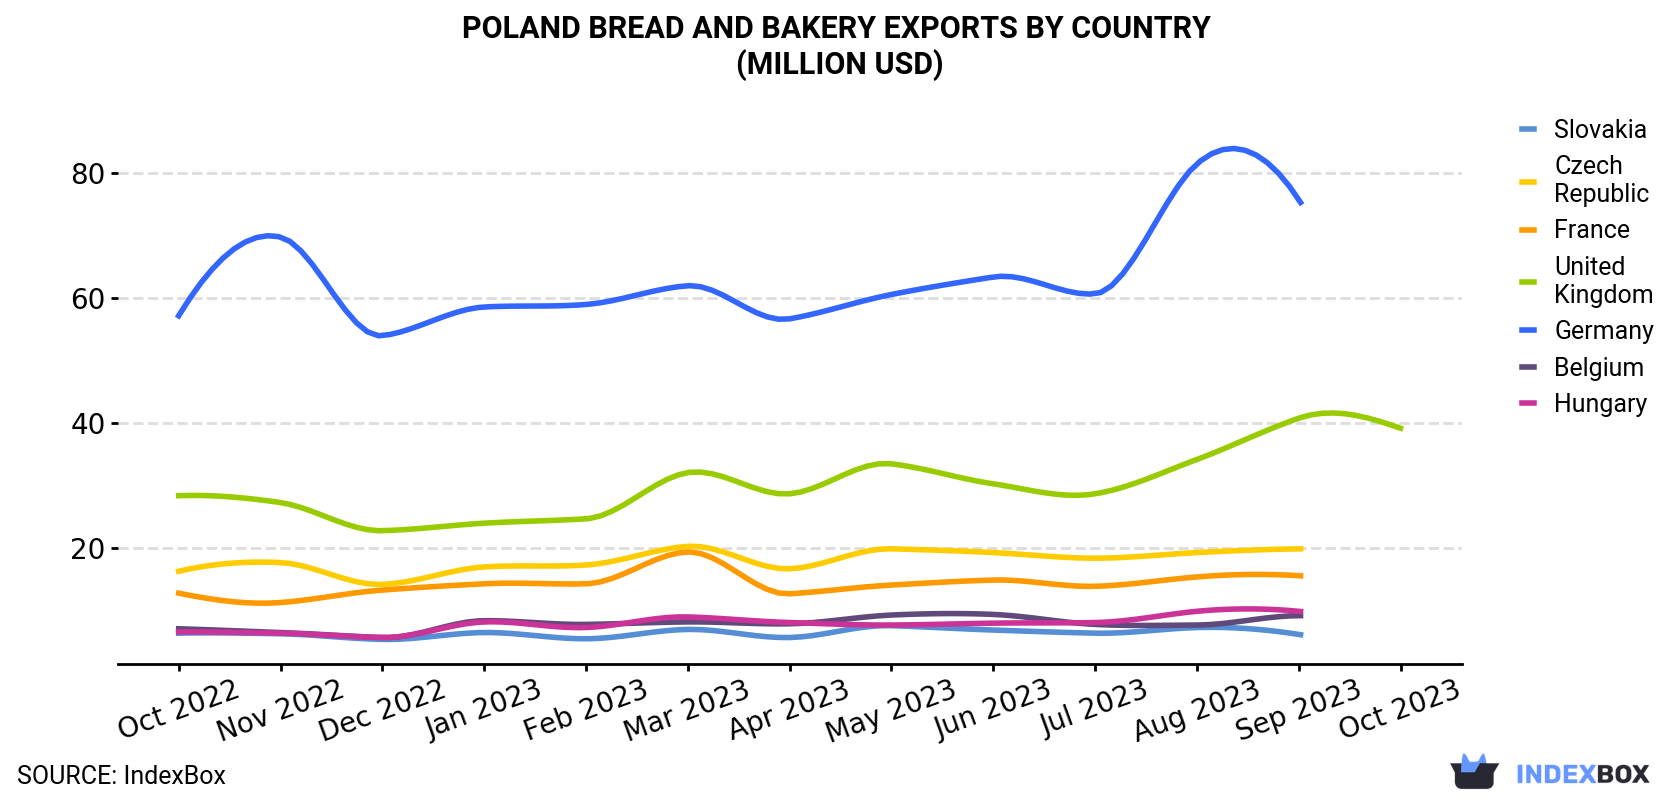 Poland Bread and Bakery Exports By Country (Million USD)